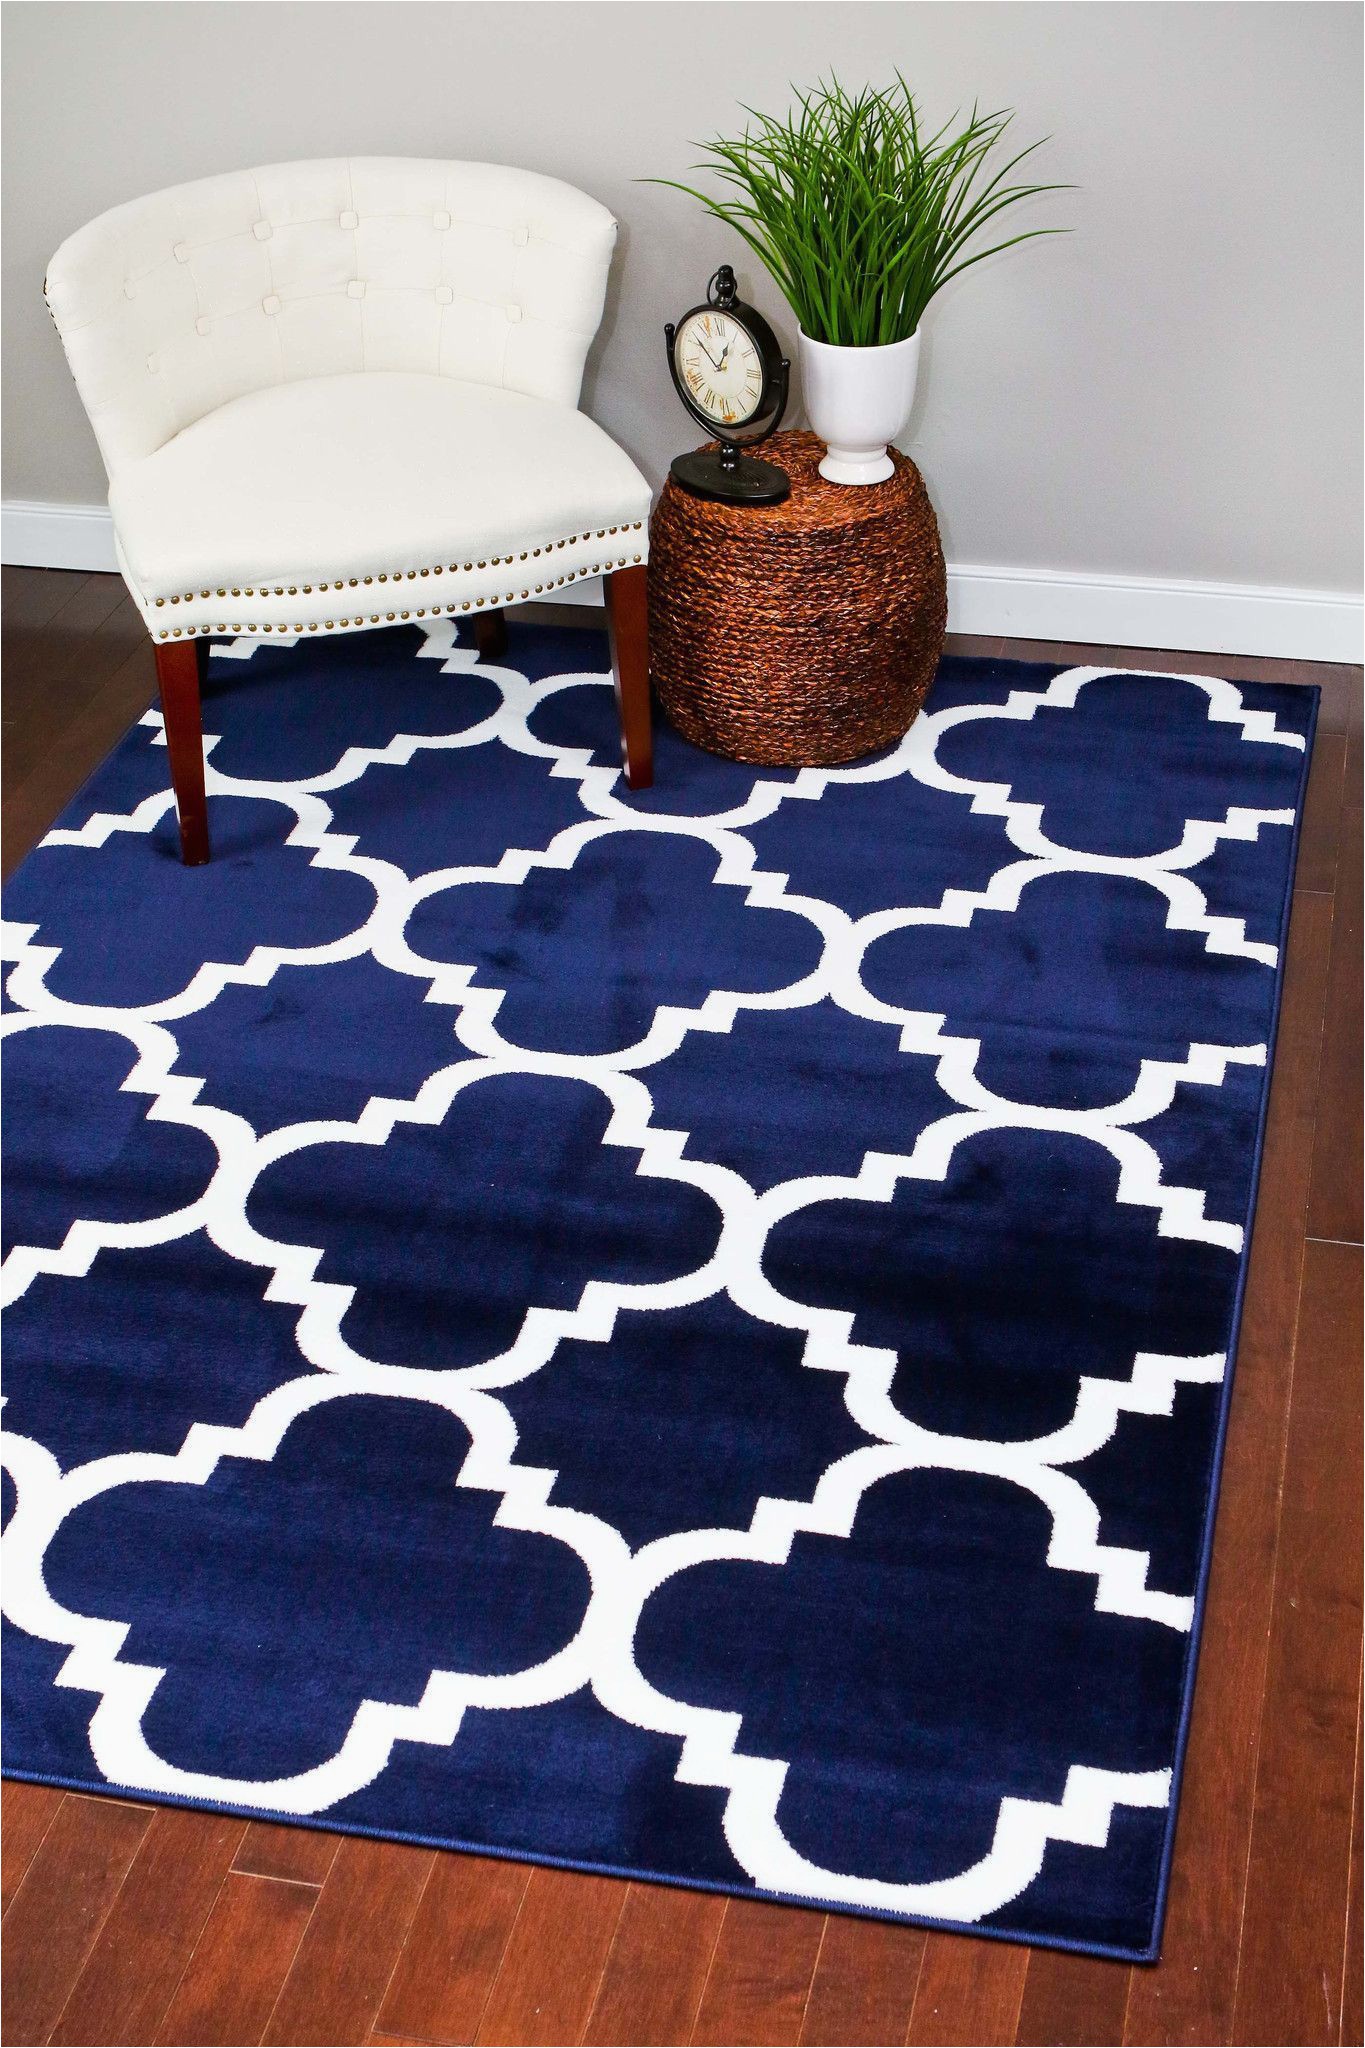 Navy Blue and Black area Rug 4518 Navy Blue